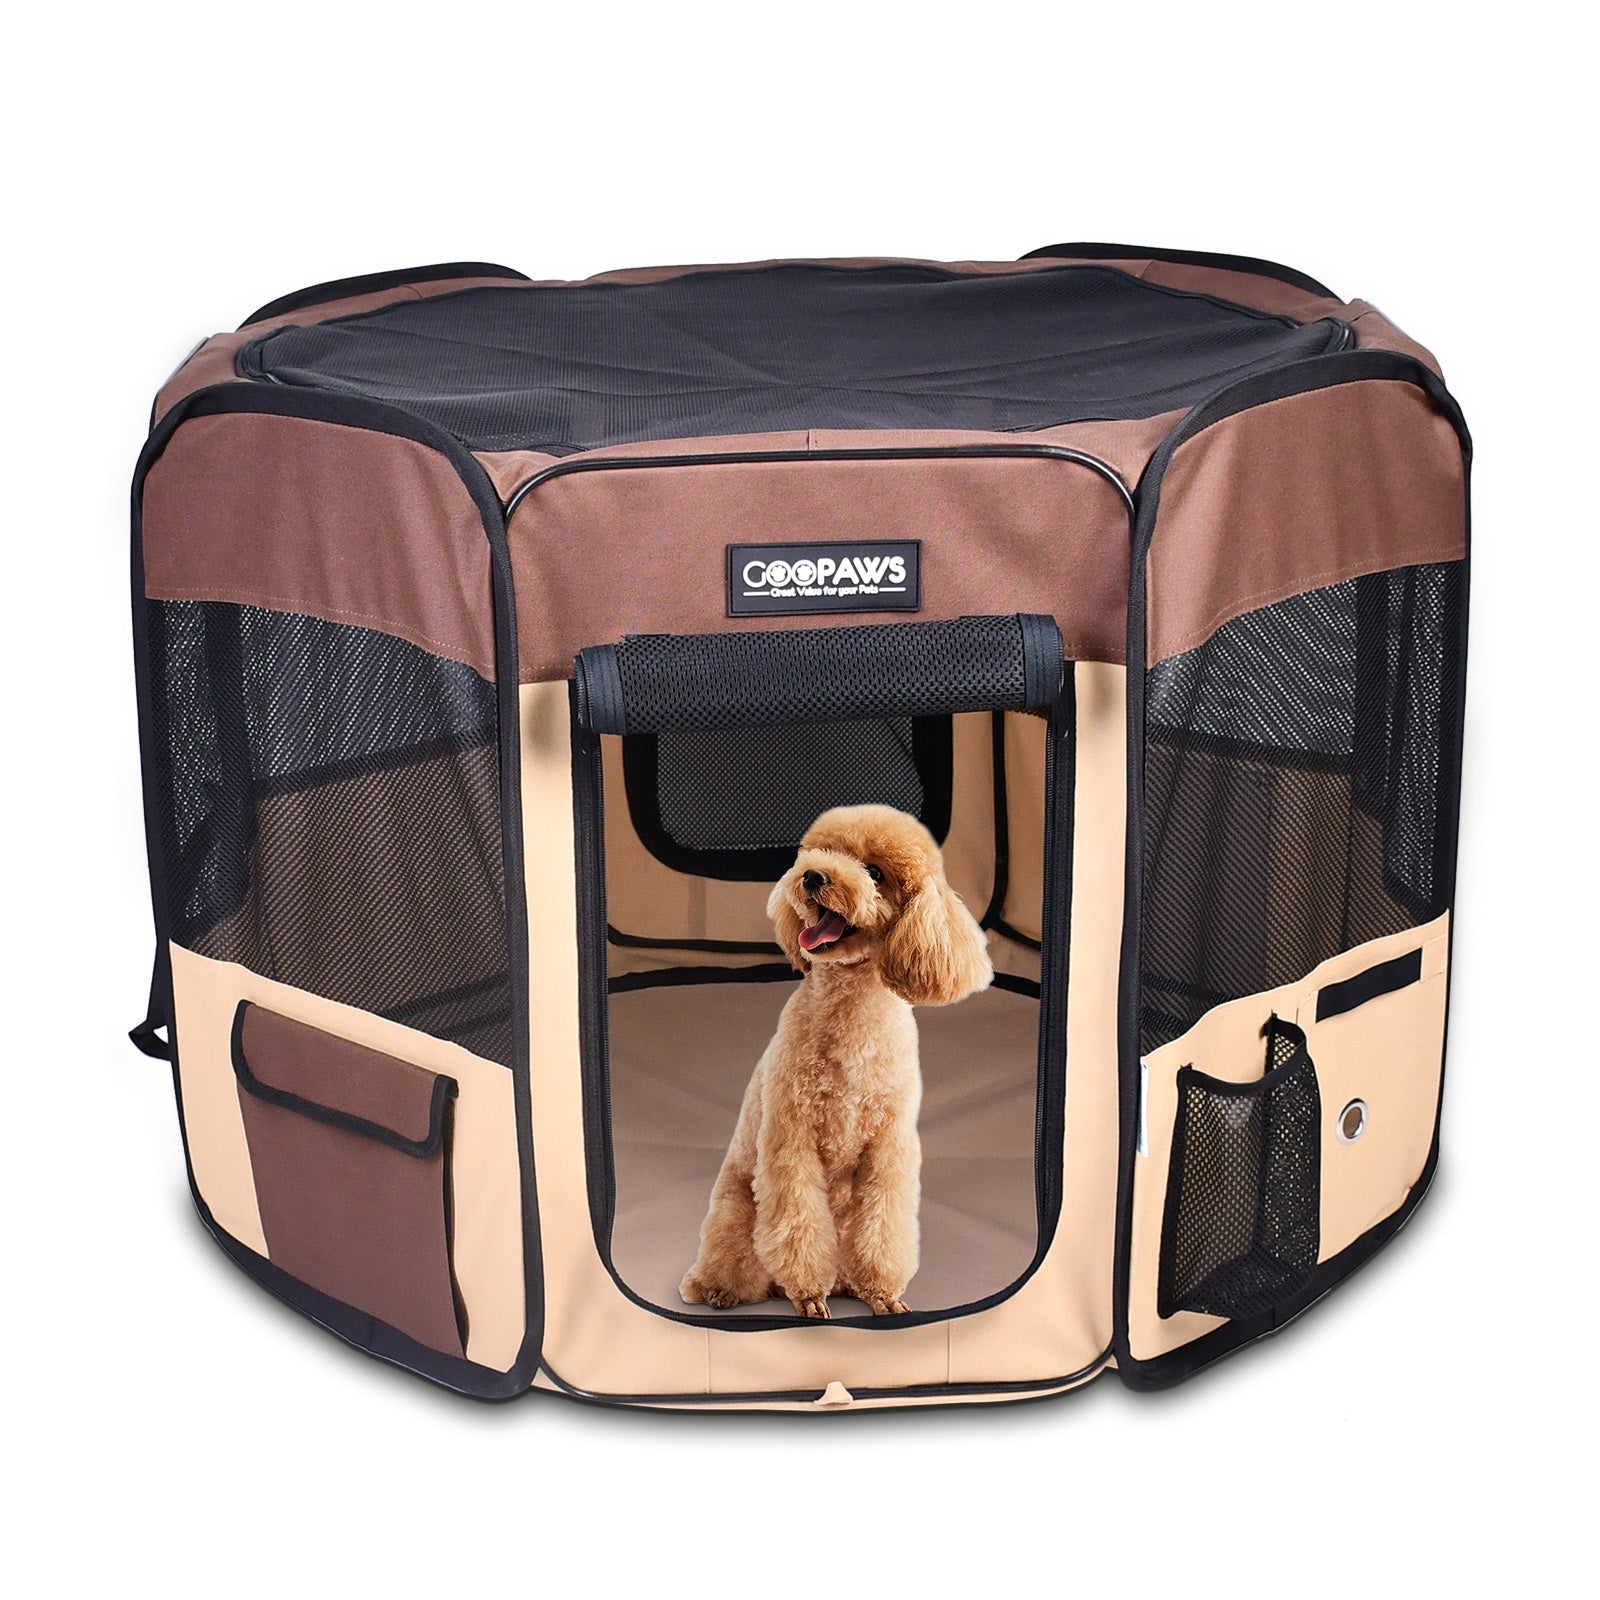 Jespet 2-Door Portable Soft-Sided Dog, Cat & Small Pet Exercise Playpen, Brown, 36''